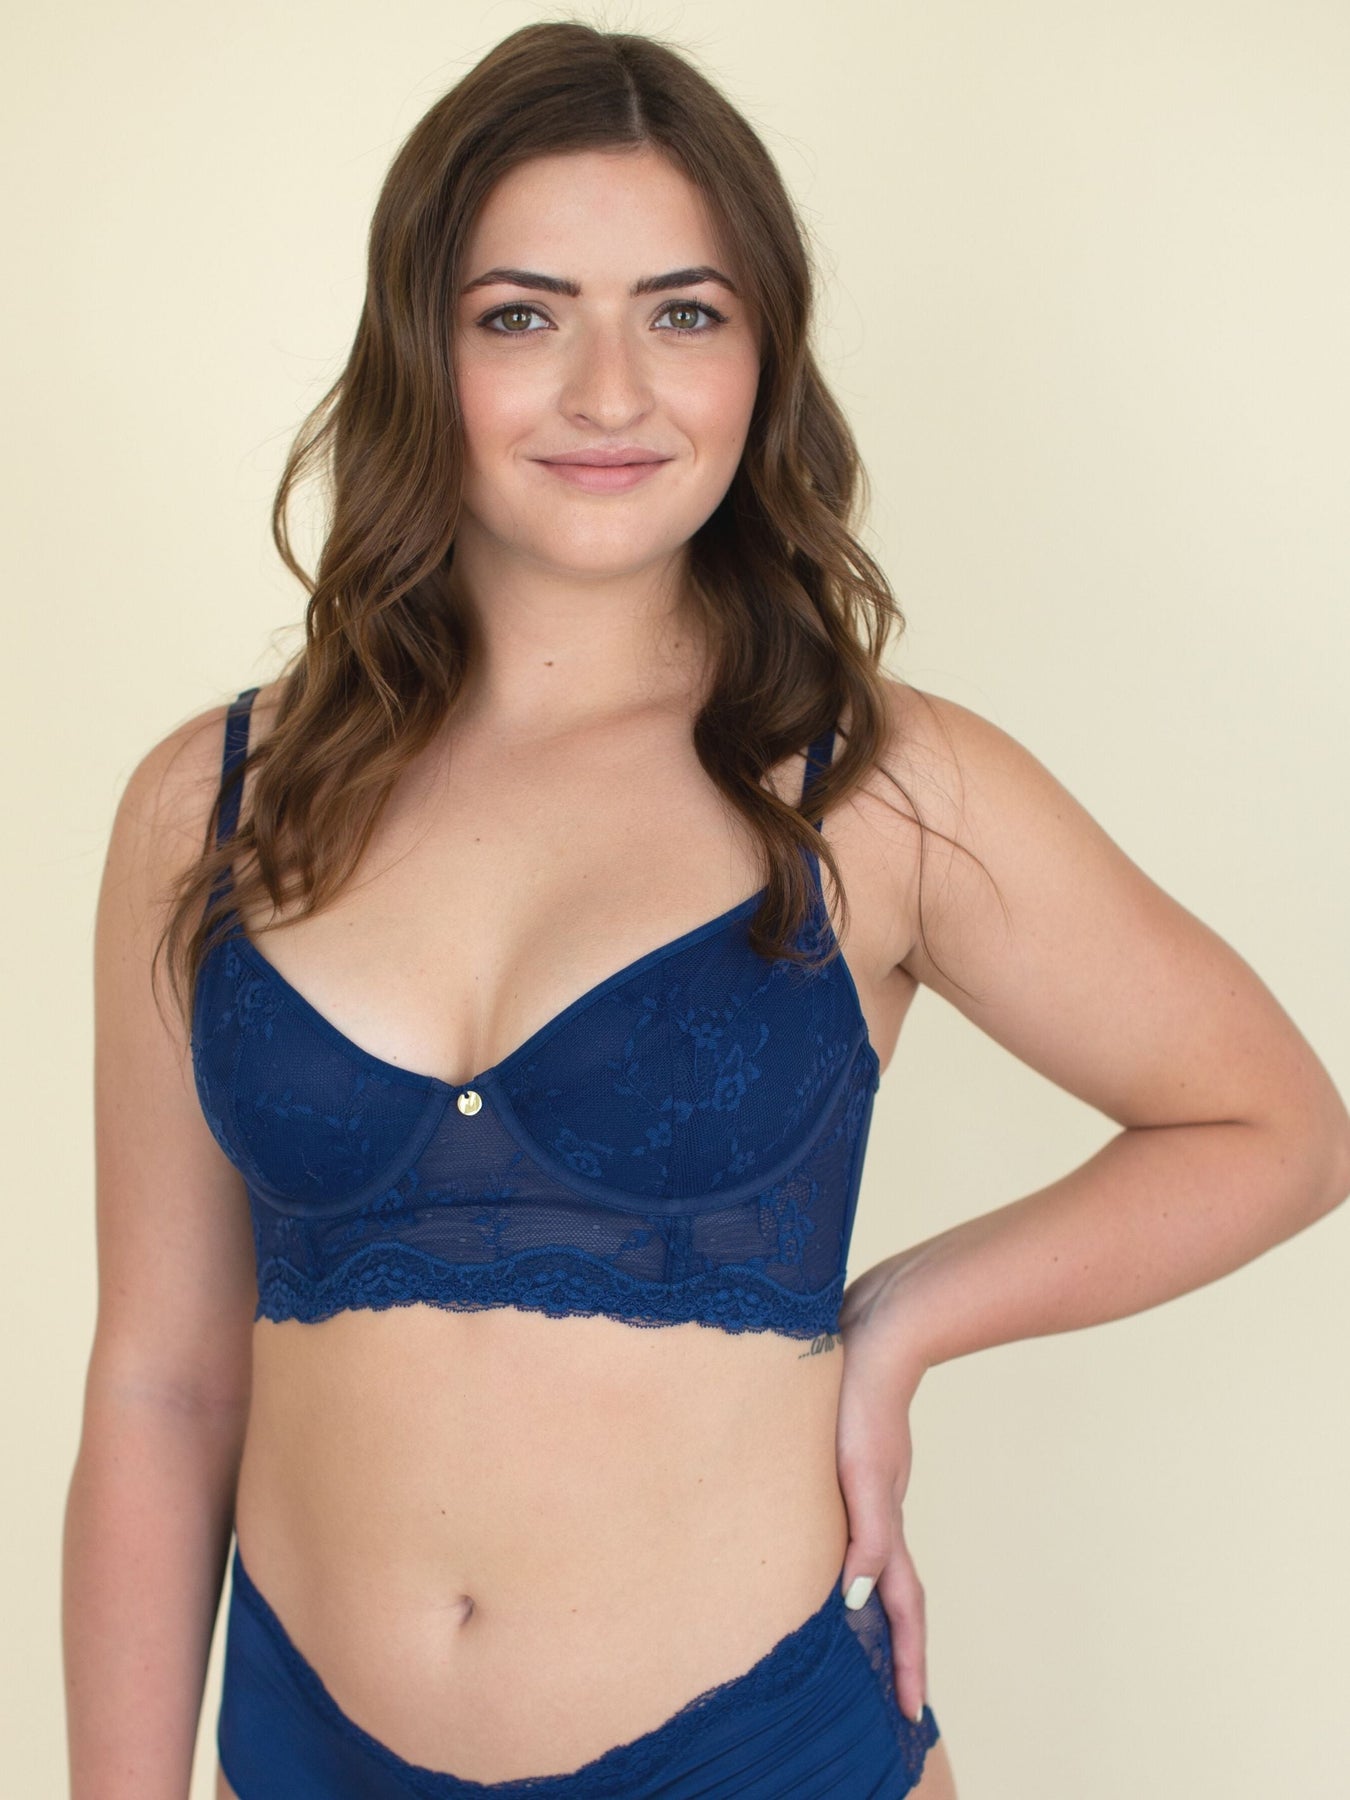 Blakely Teal Border Lace Bras 38D-42DD